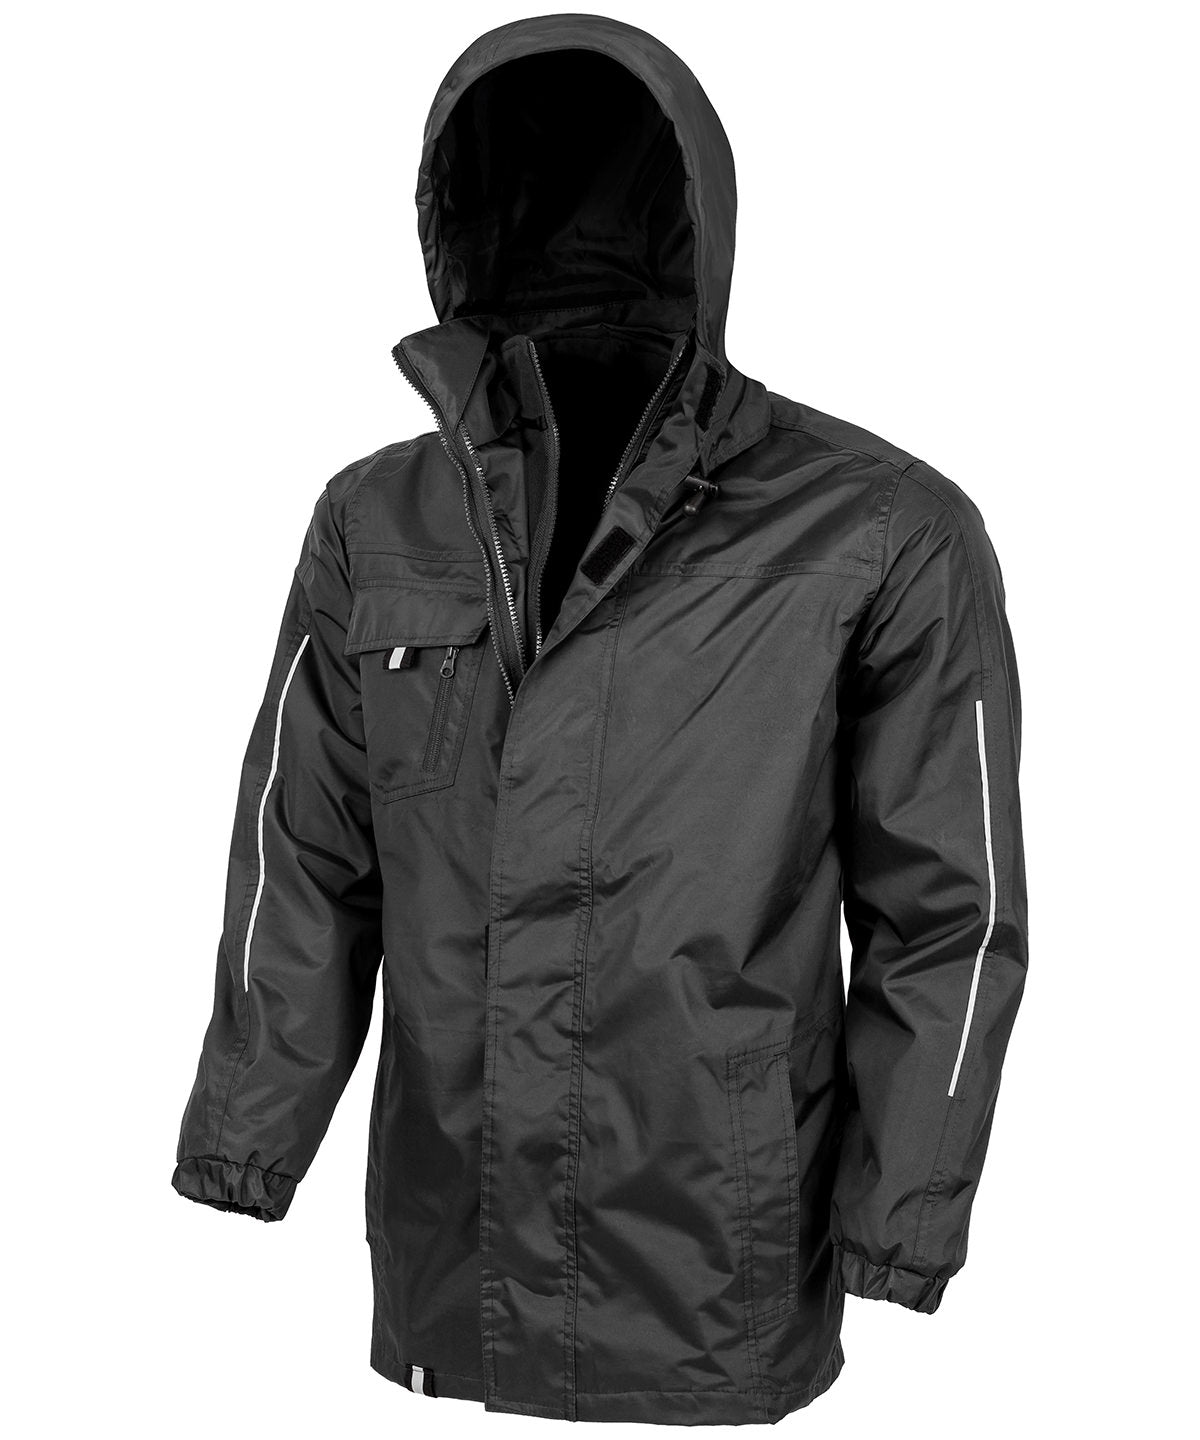 3-in1 CORE transit jacket with printable softshell inner